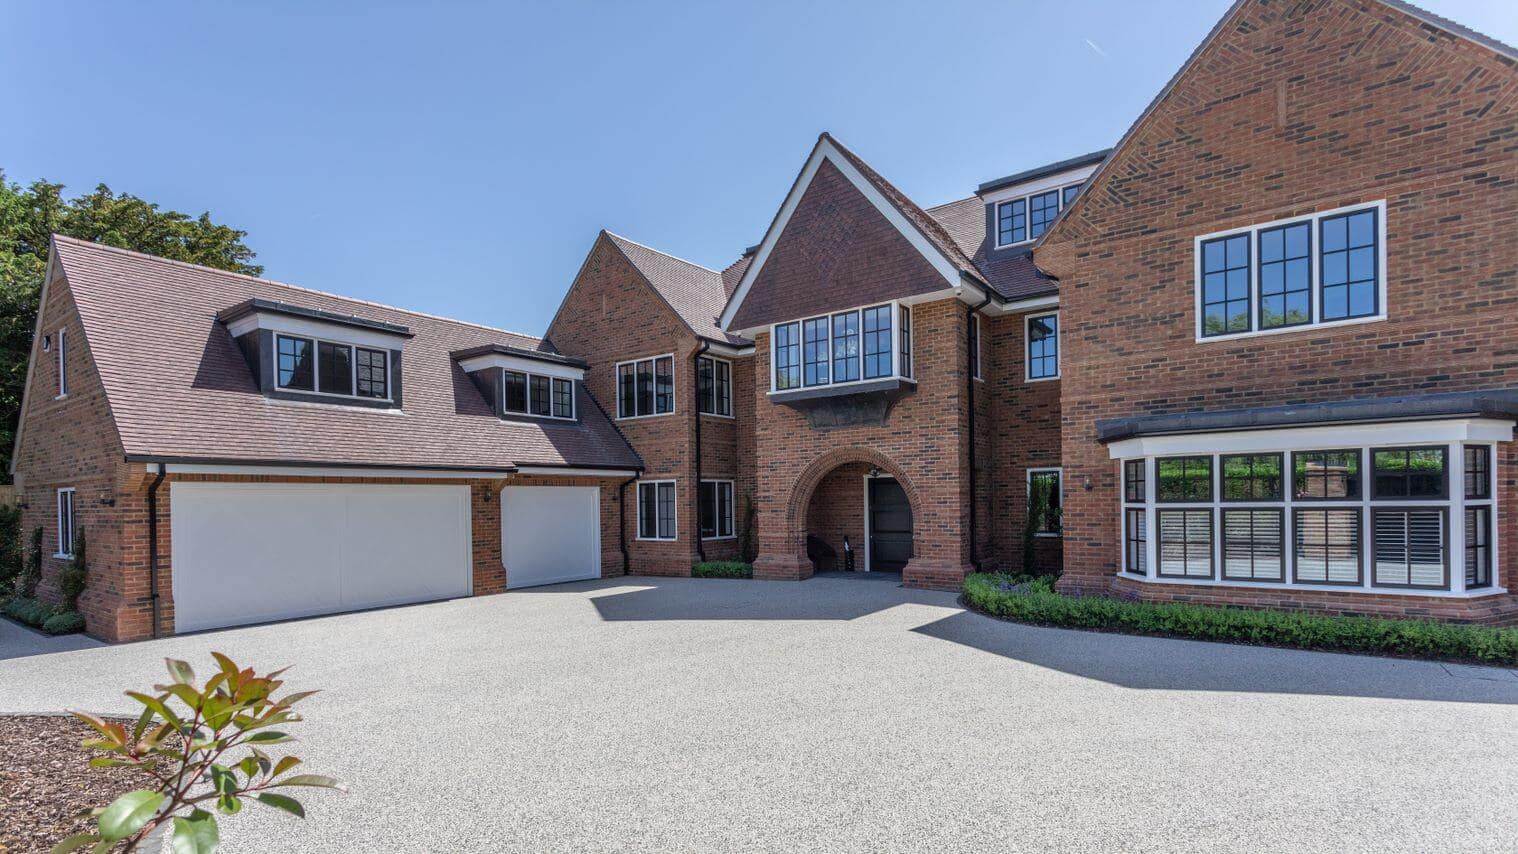 High-quality residential property in Beaconsfield showing Marley's Acme Double Camber